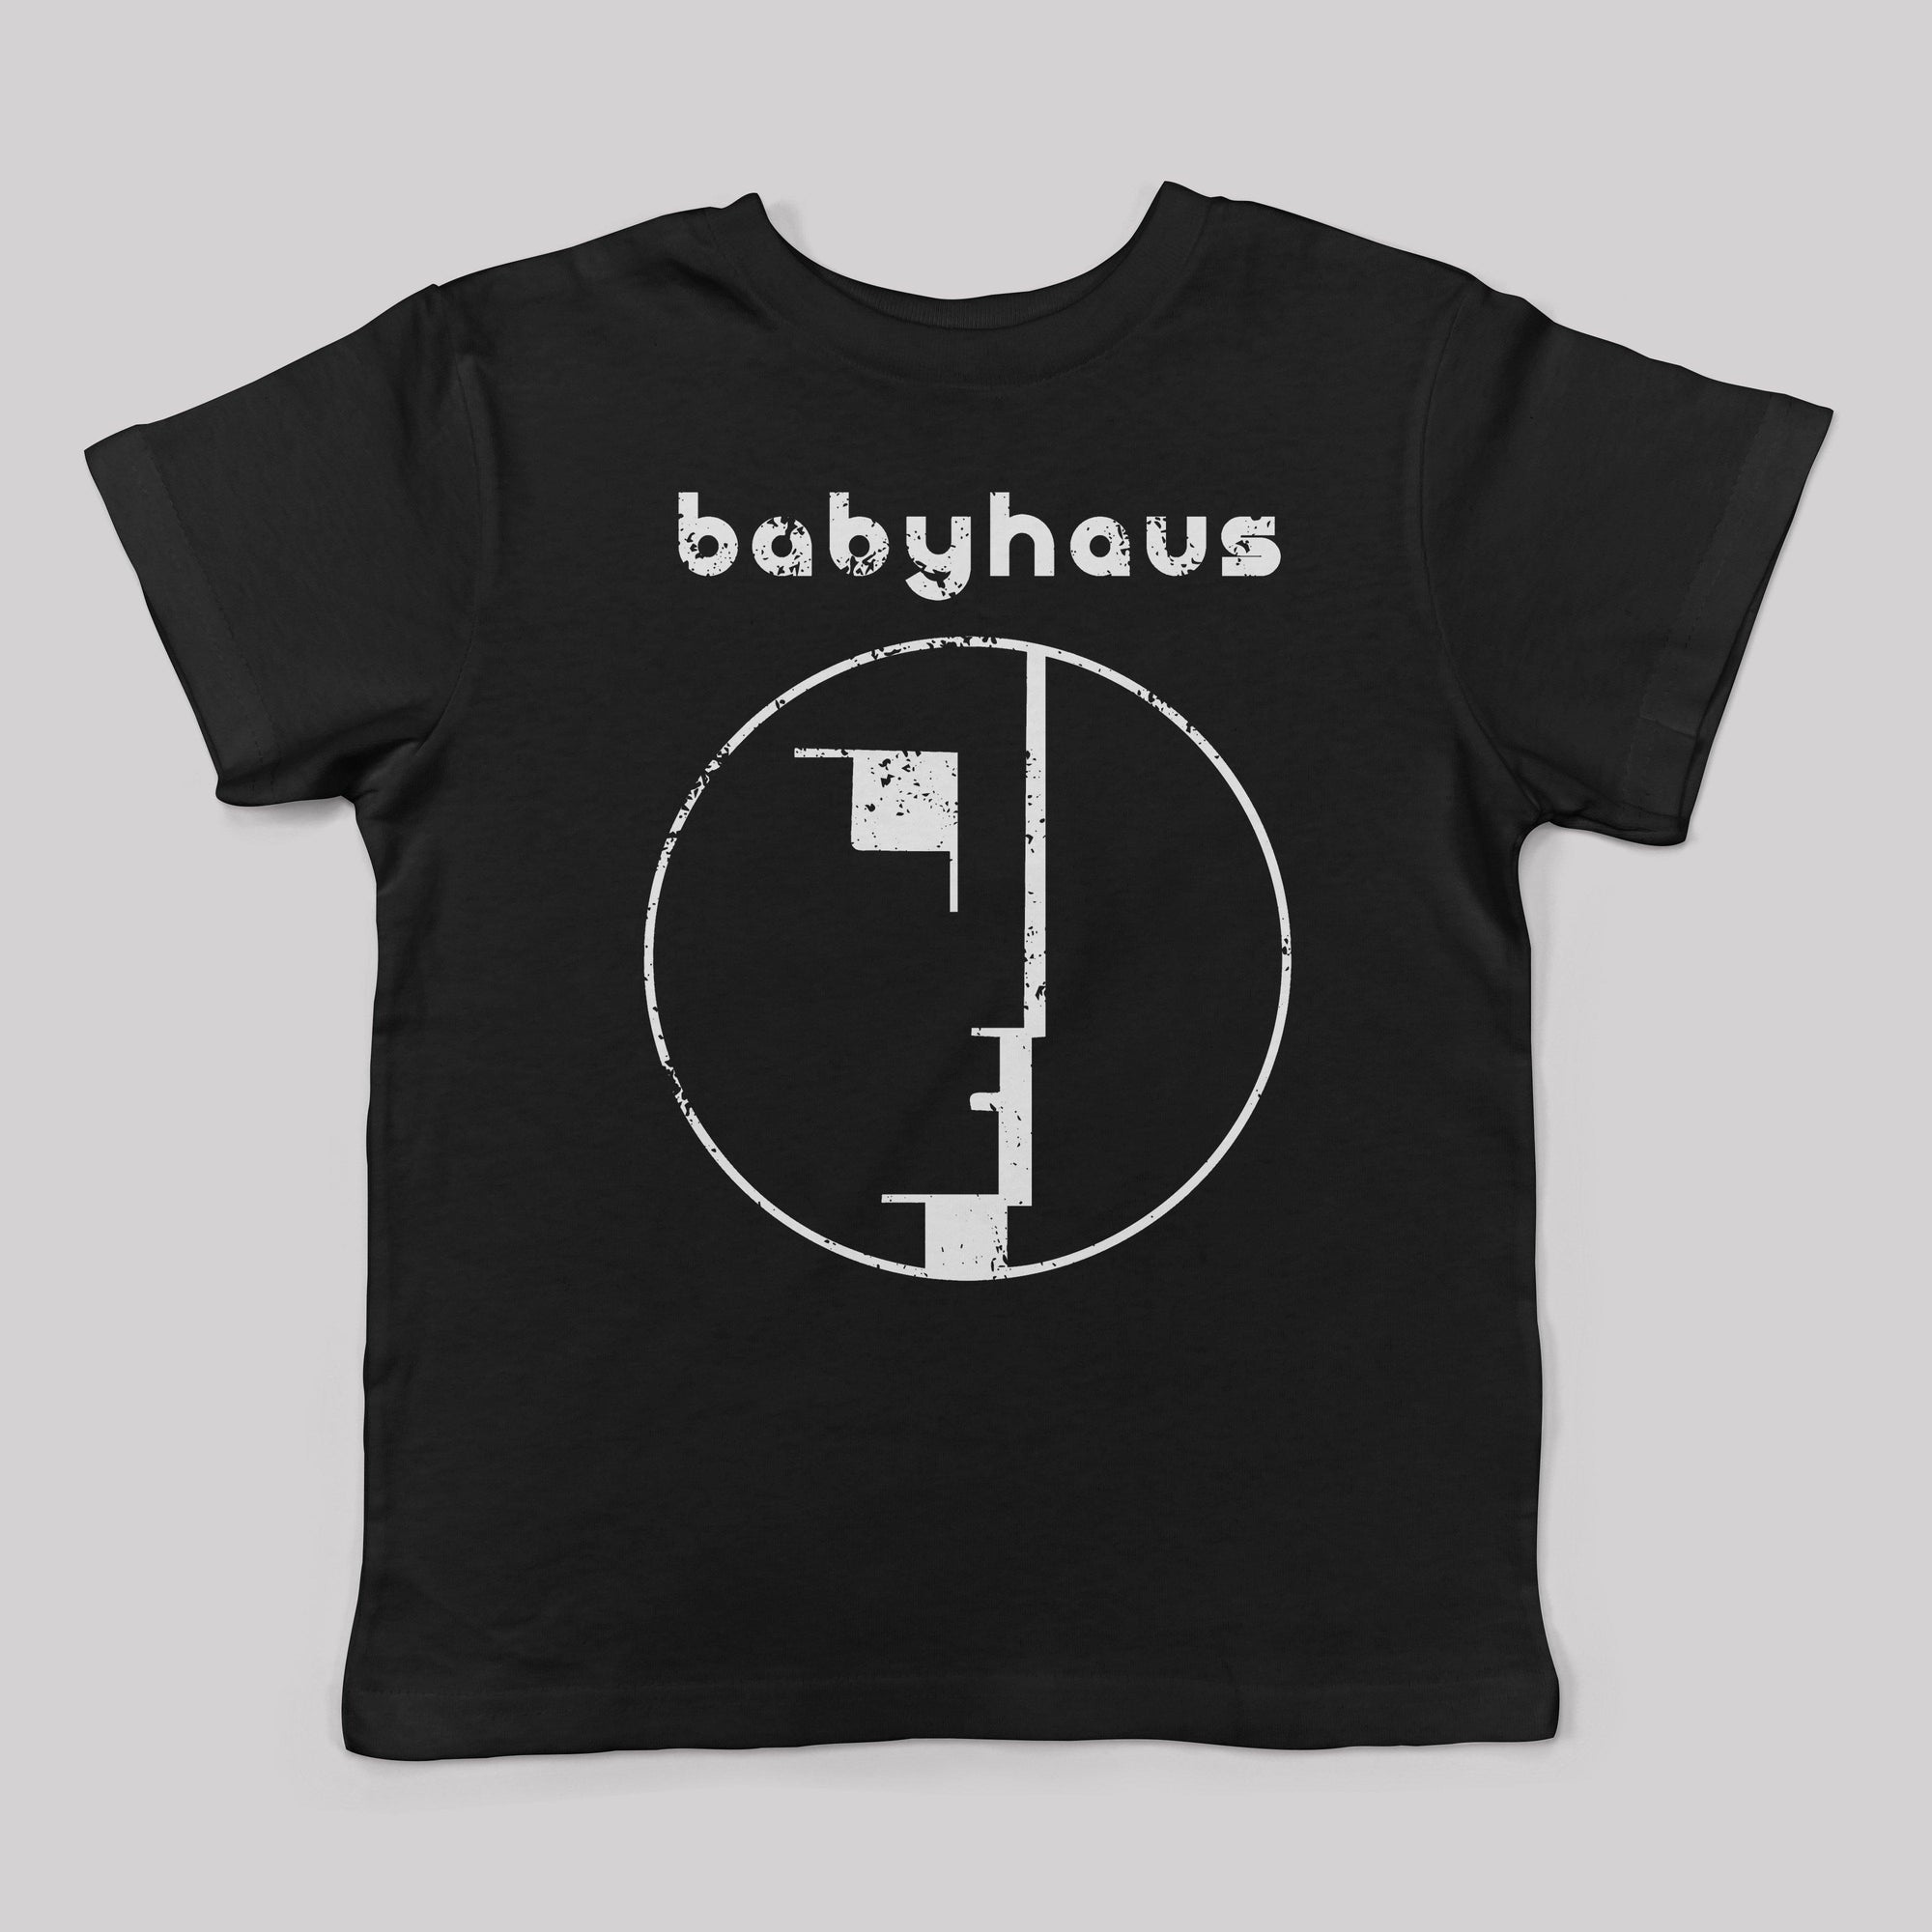 "BabyHaus" Tee Inspired by Bauhaus for kids - Baby Teith